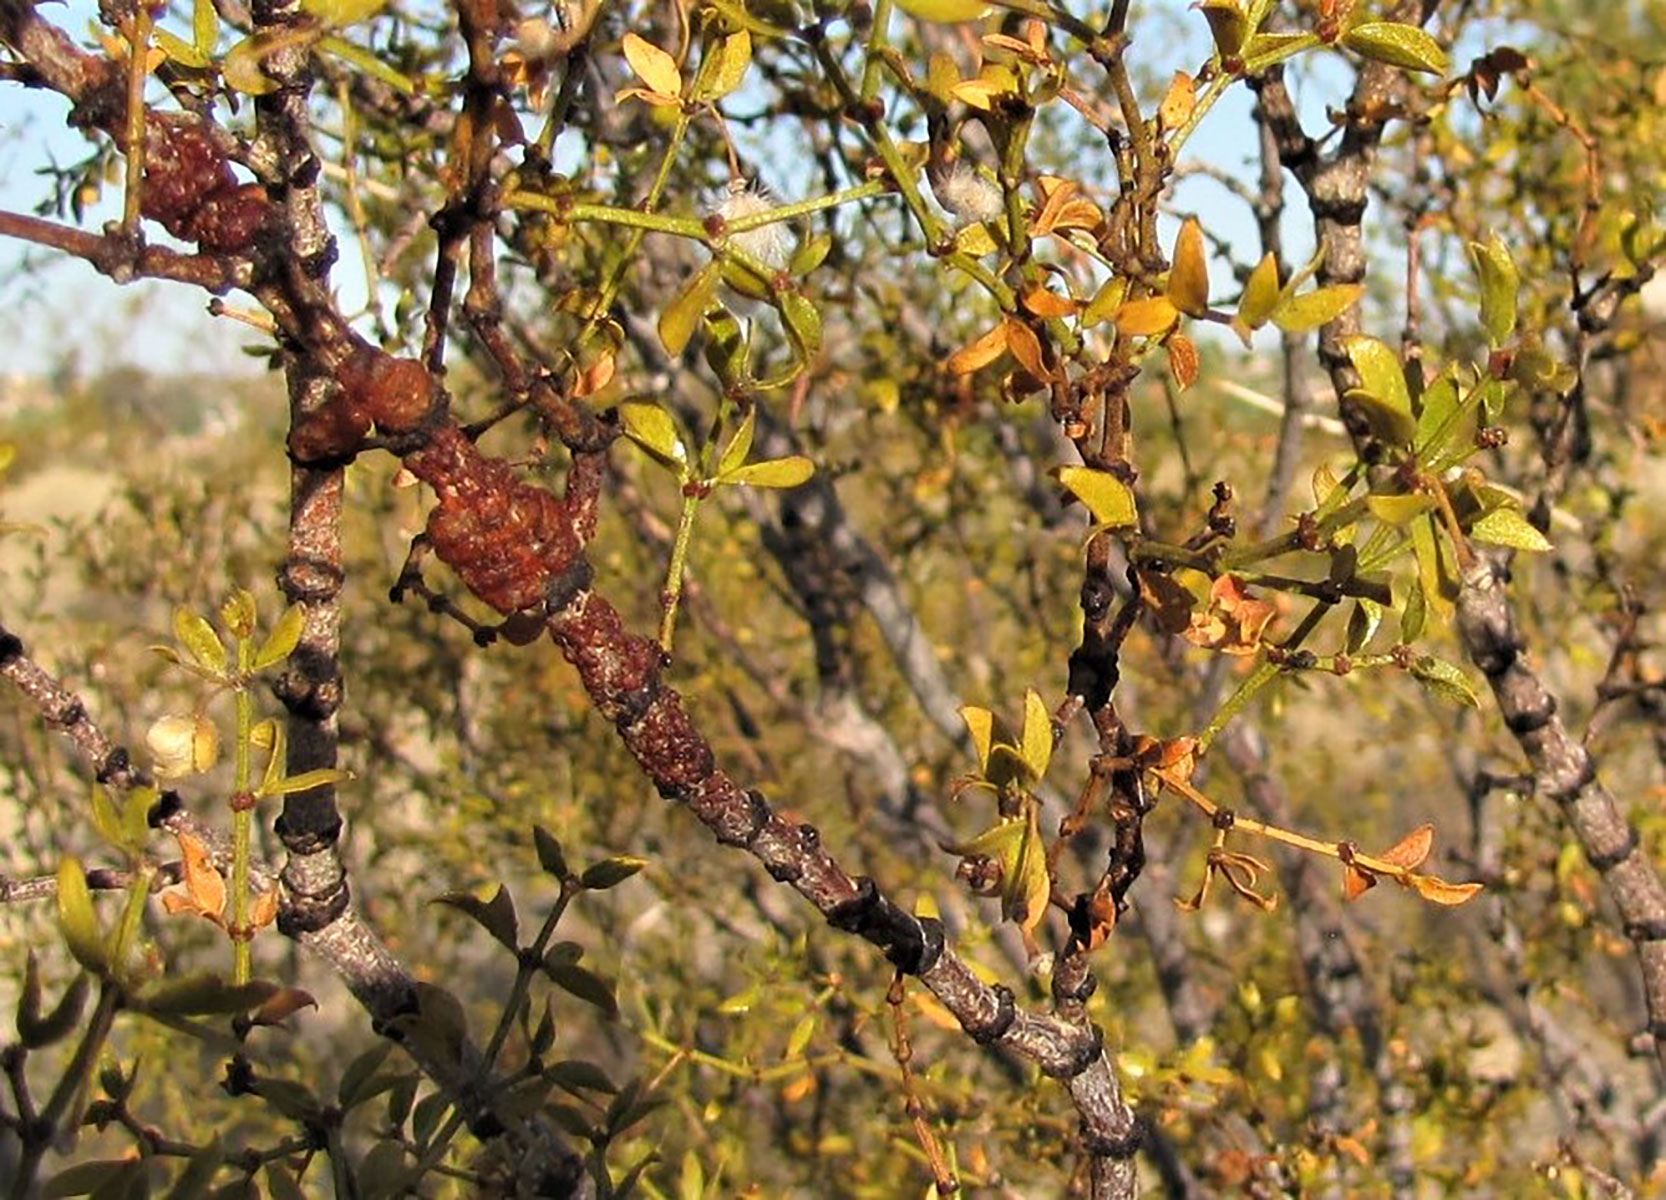 Creosote lac on stem